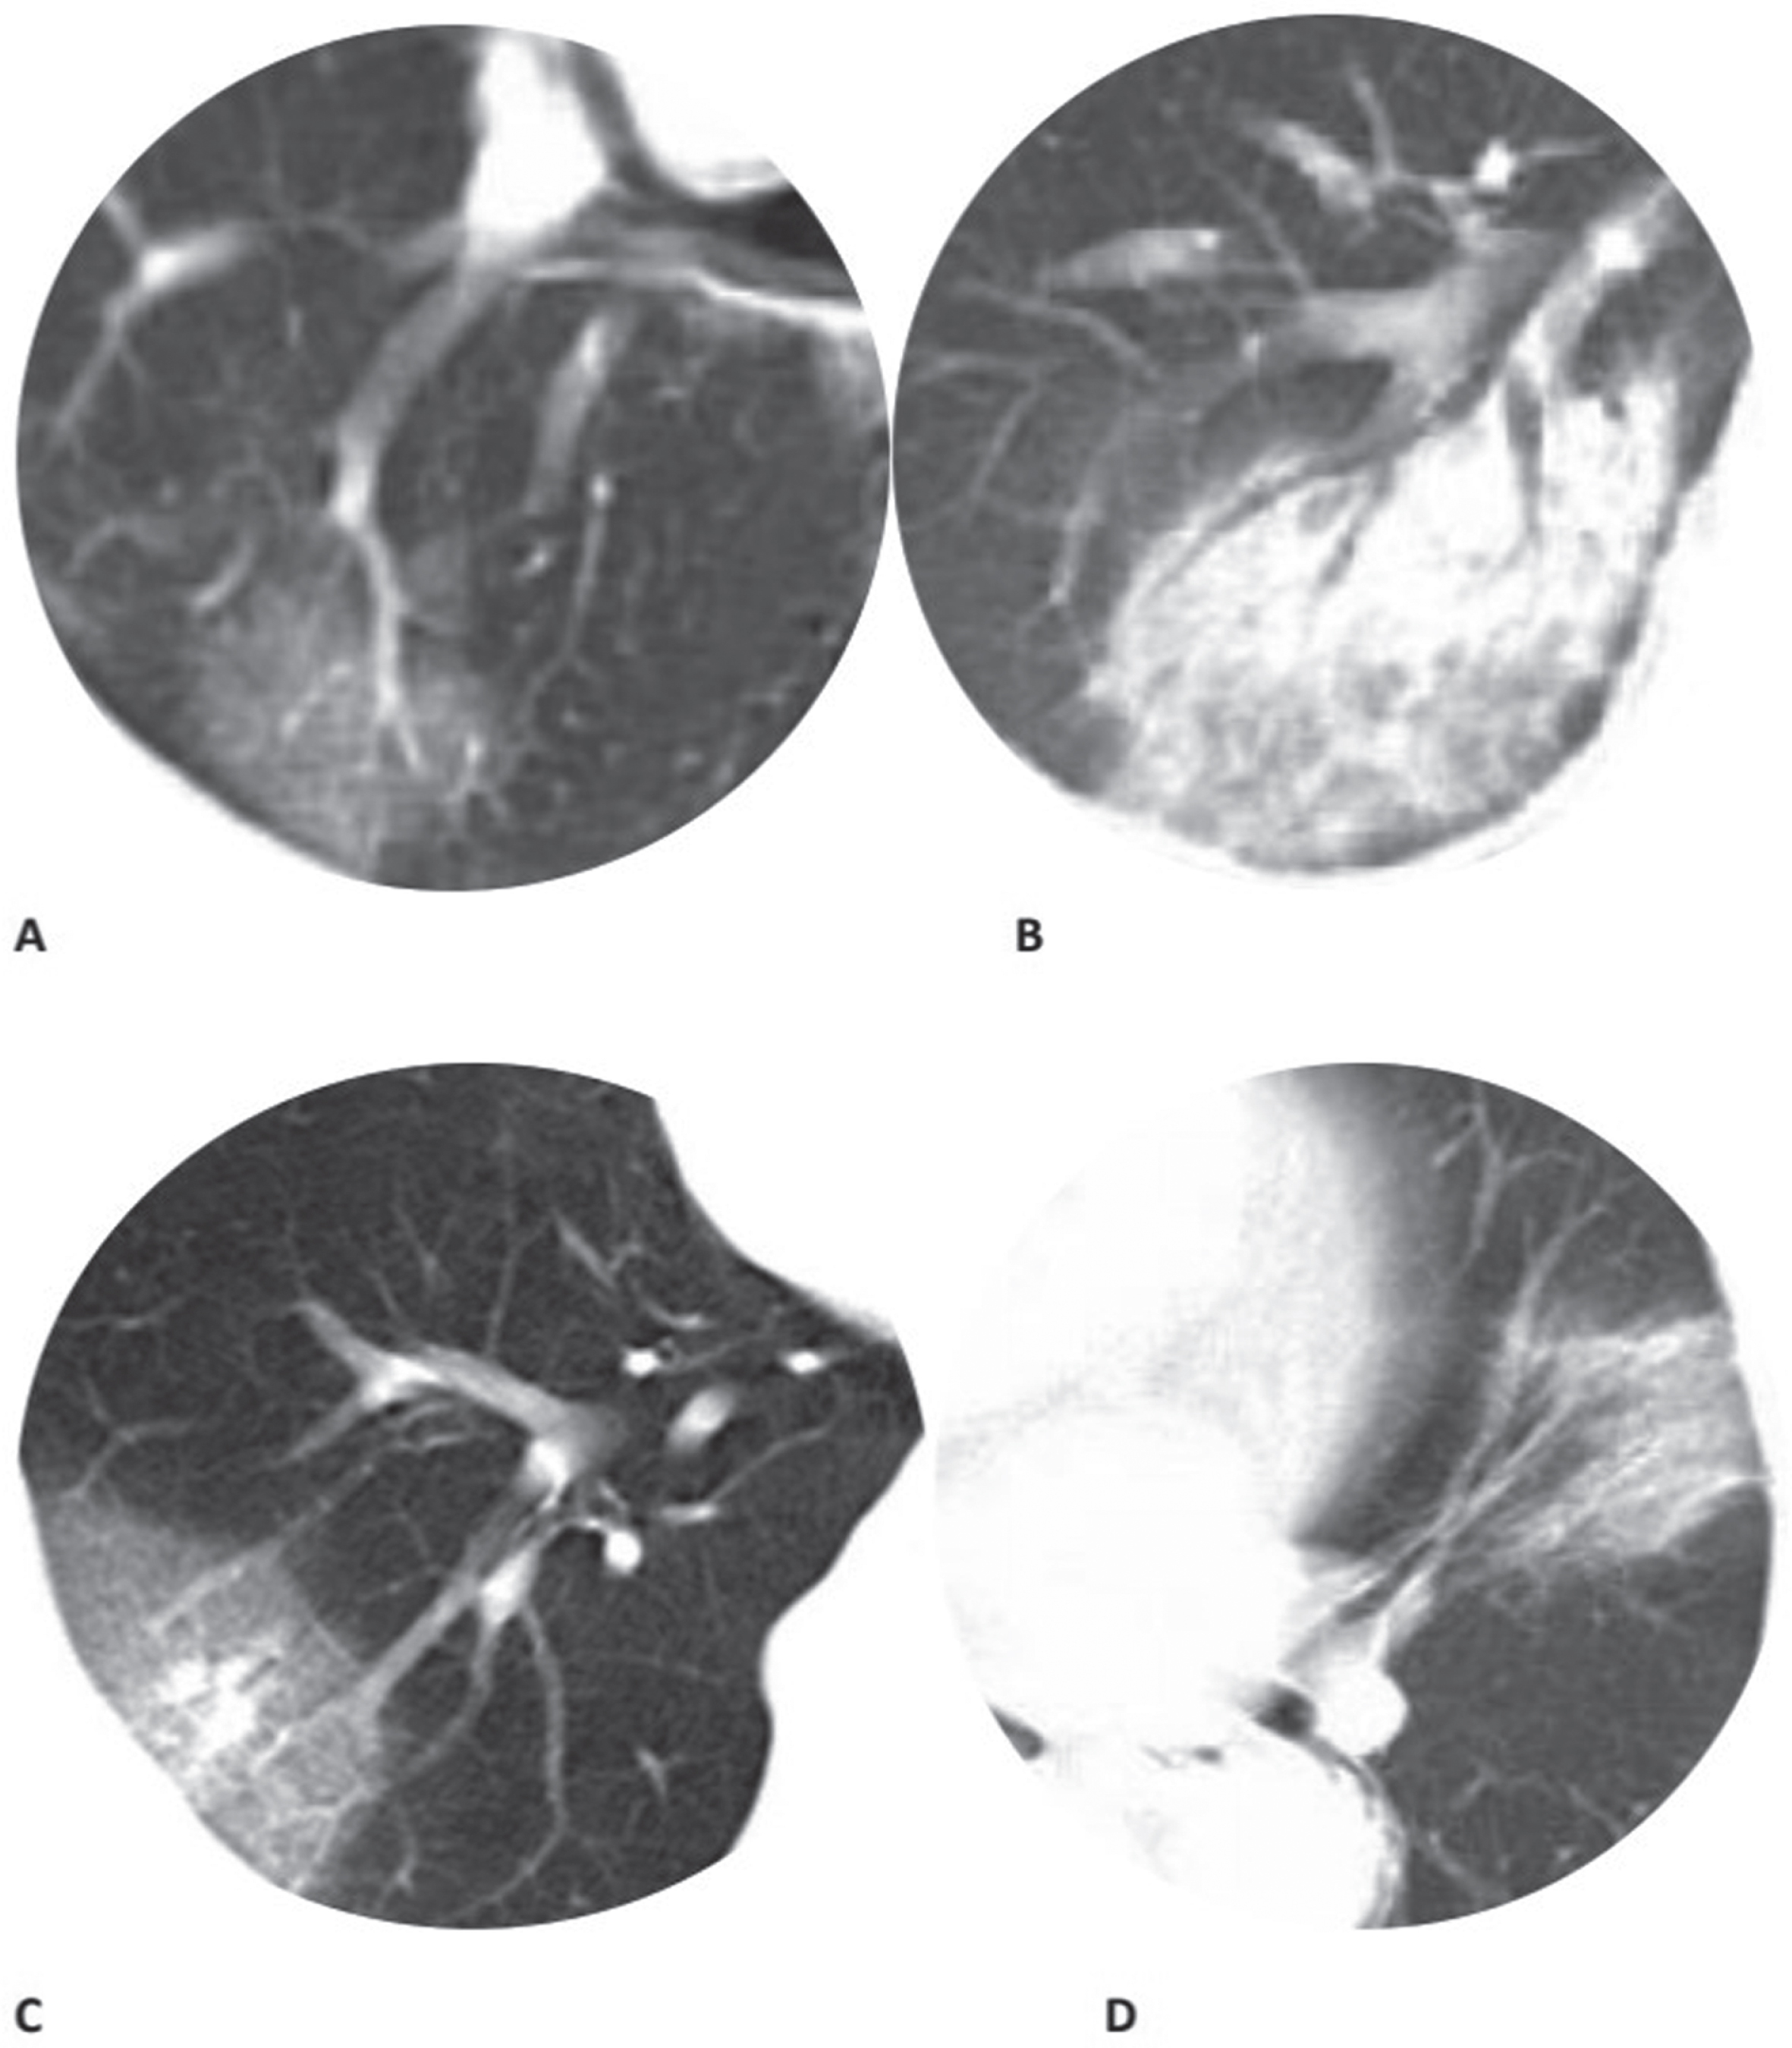 Chest CT findings of moderate COVID-19 pneumonia on axial images (a) GGO; (b) Consolidation; (c) Vascular thickening; (d) Bronchial wall thickening. The same window level and width were set on all images.